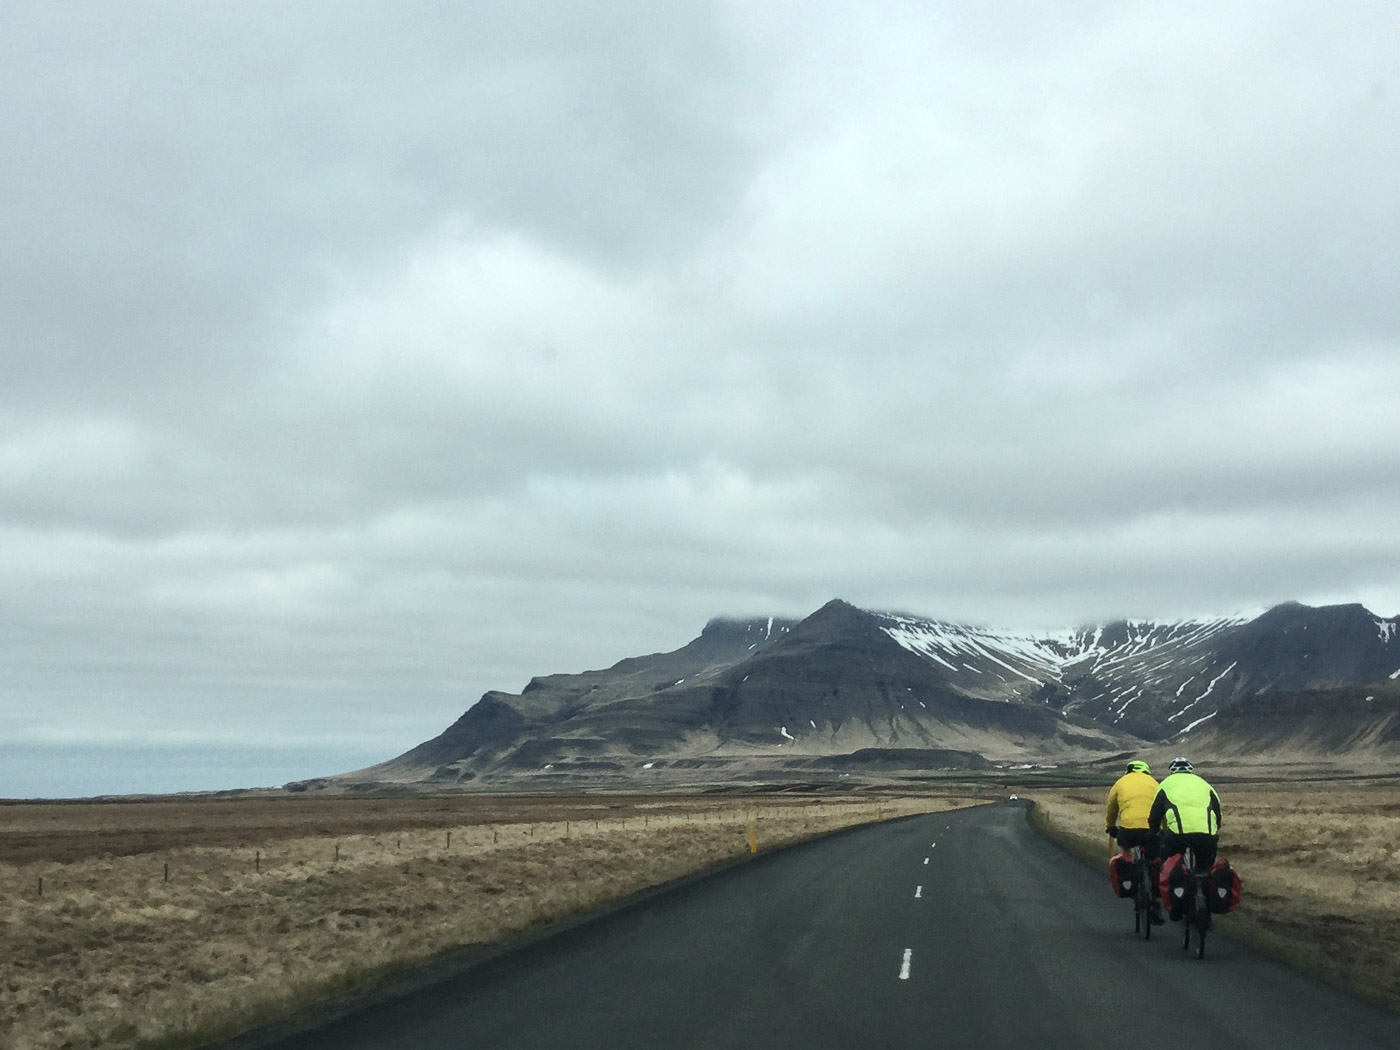 Reykjavík. Miscellaneous XCVII. - Somewhere, yes, I remember now. I took this picture on the way to Ólafsvík, Snæfellsnes. I. (1 till 31 May 2016)